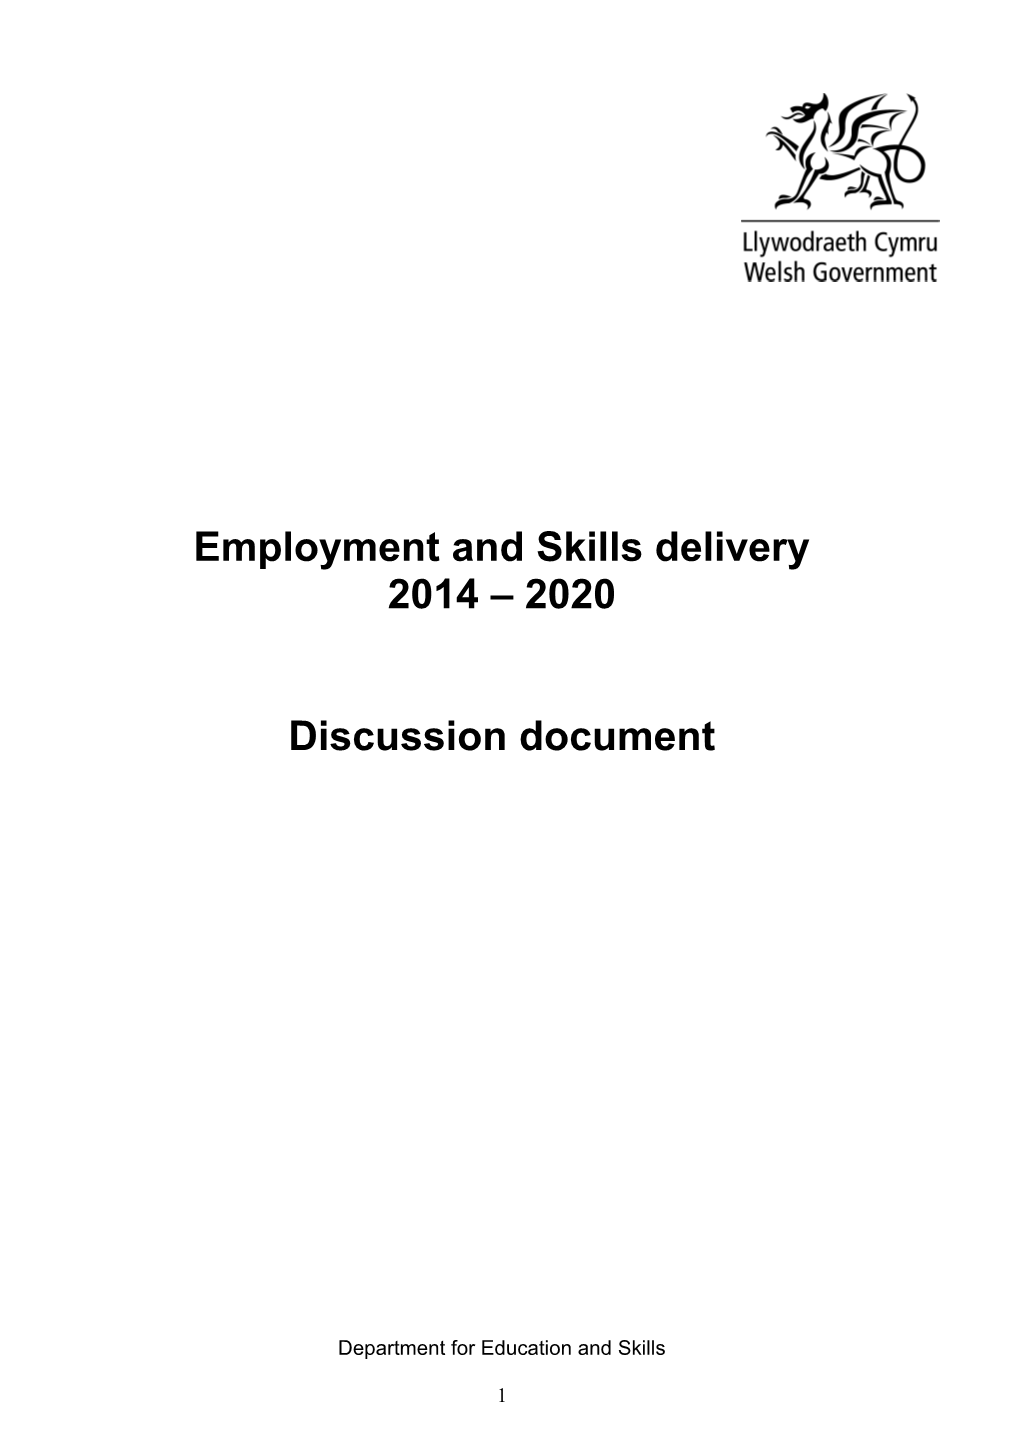 Employment and Skills Delivery Model